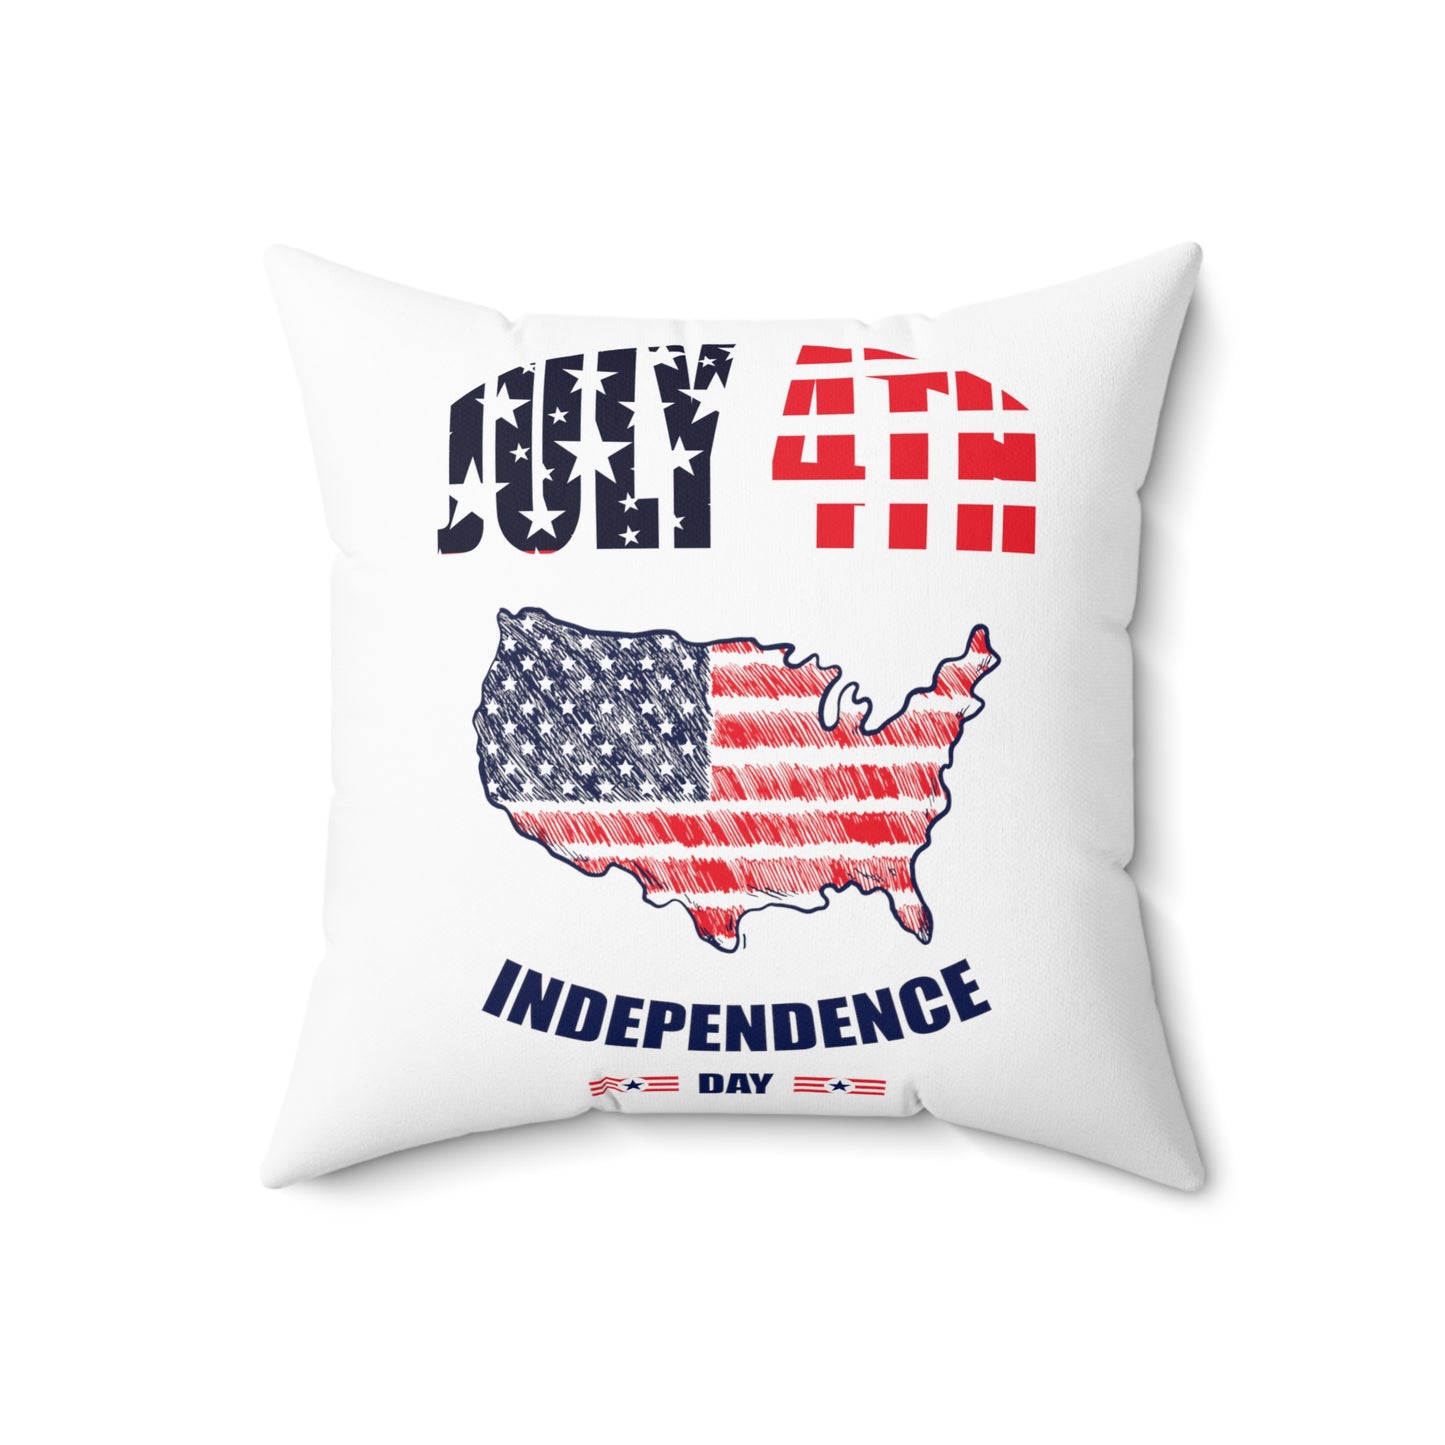 4th of July Independence Day Celebration Spun Polyester Square Pillow